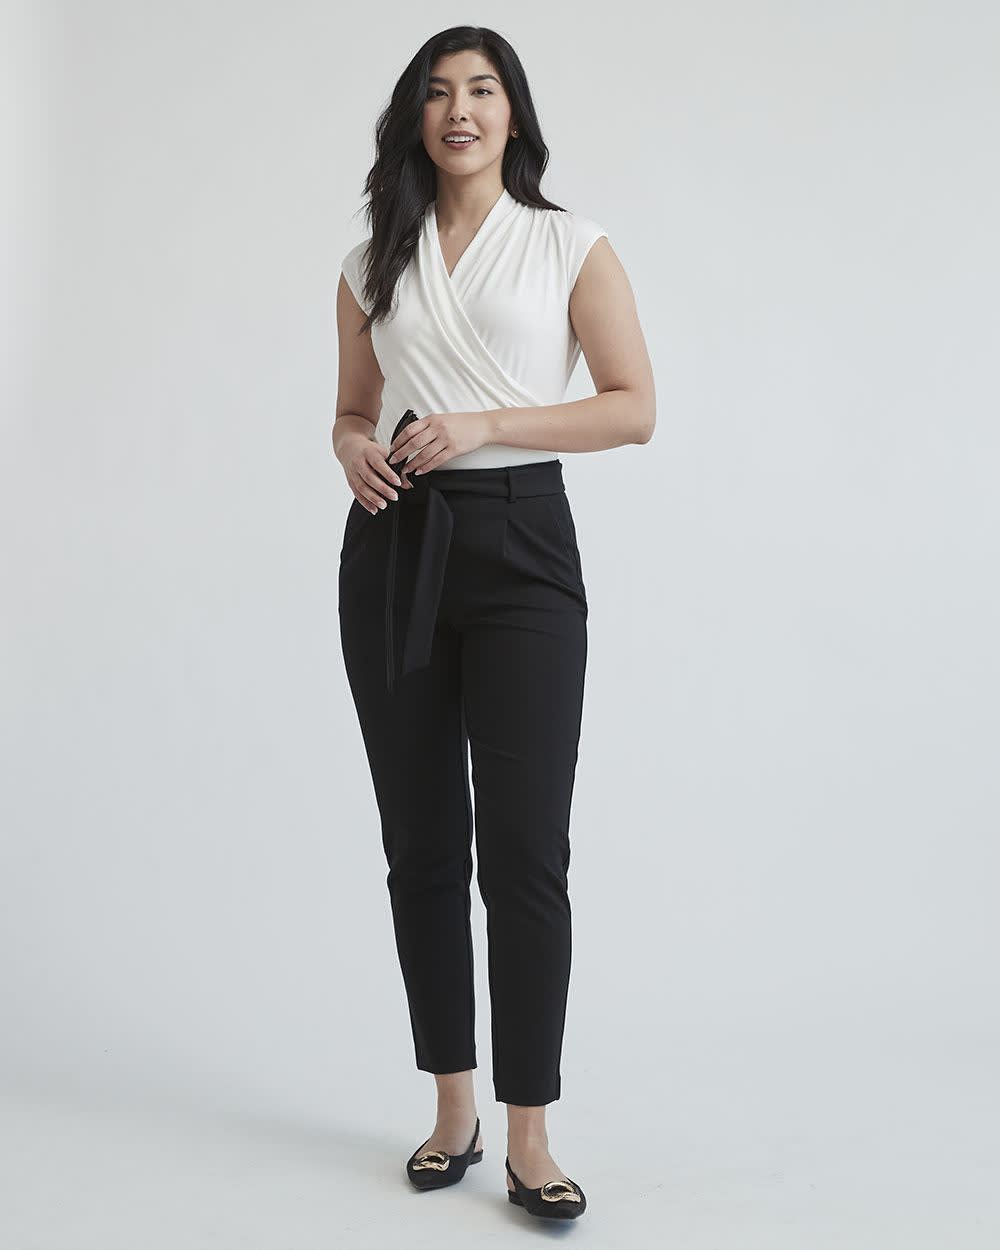 Mid-Rise Dressy Jogger Pant with Sash - 29